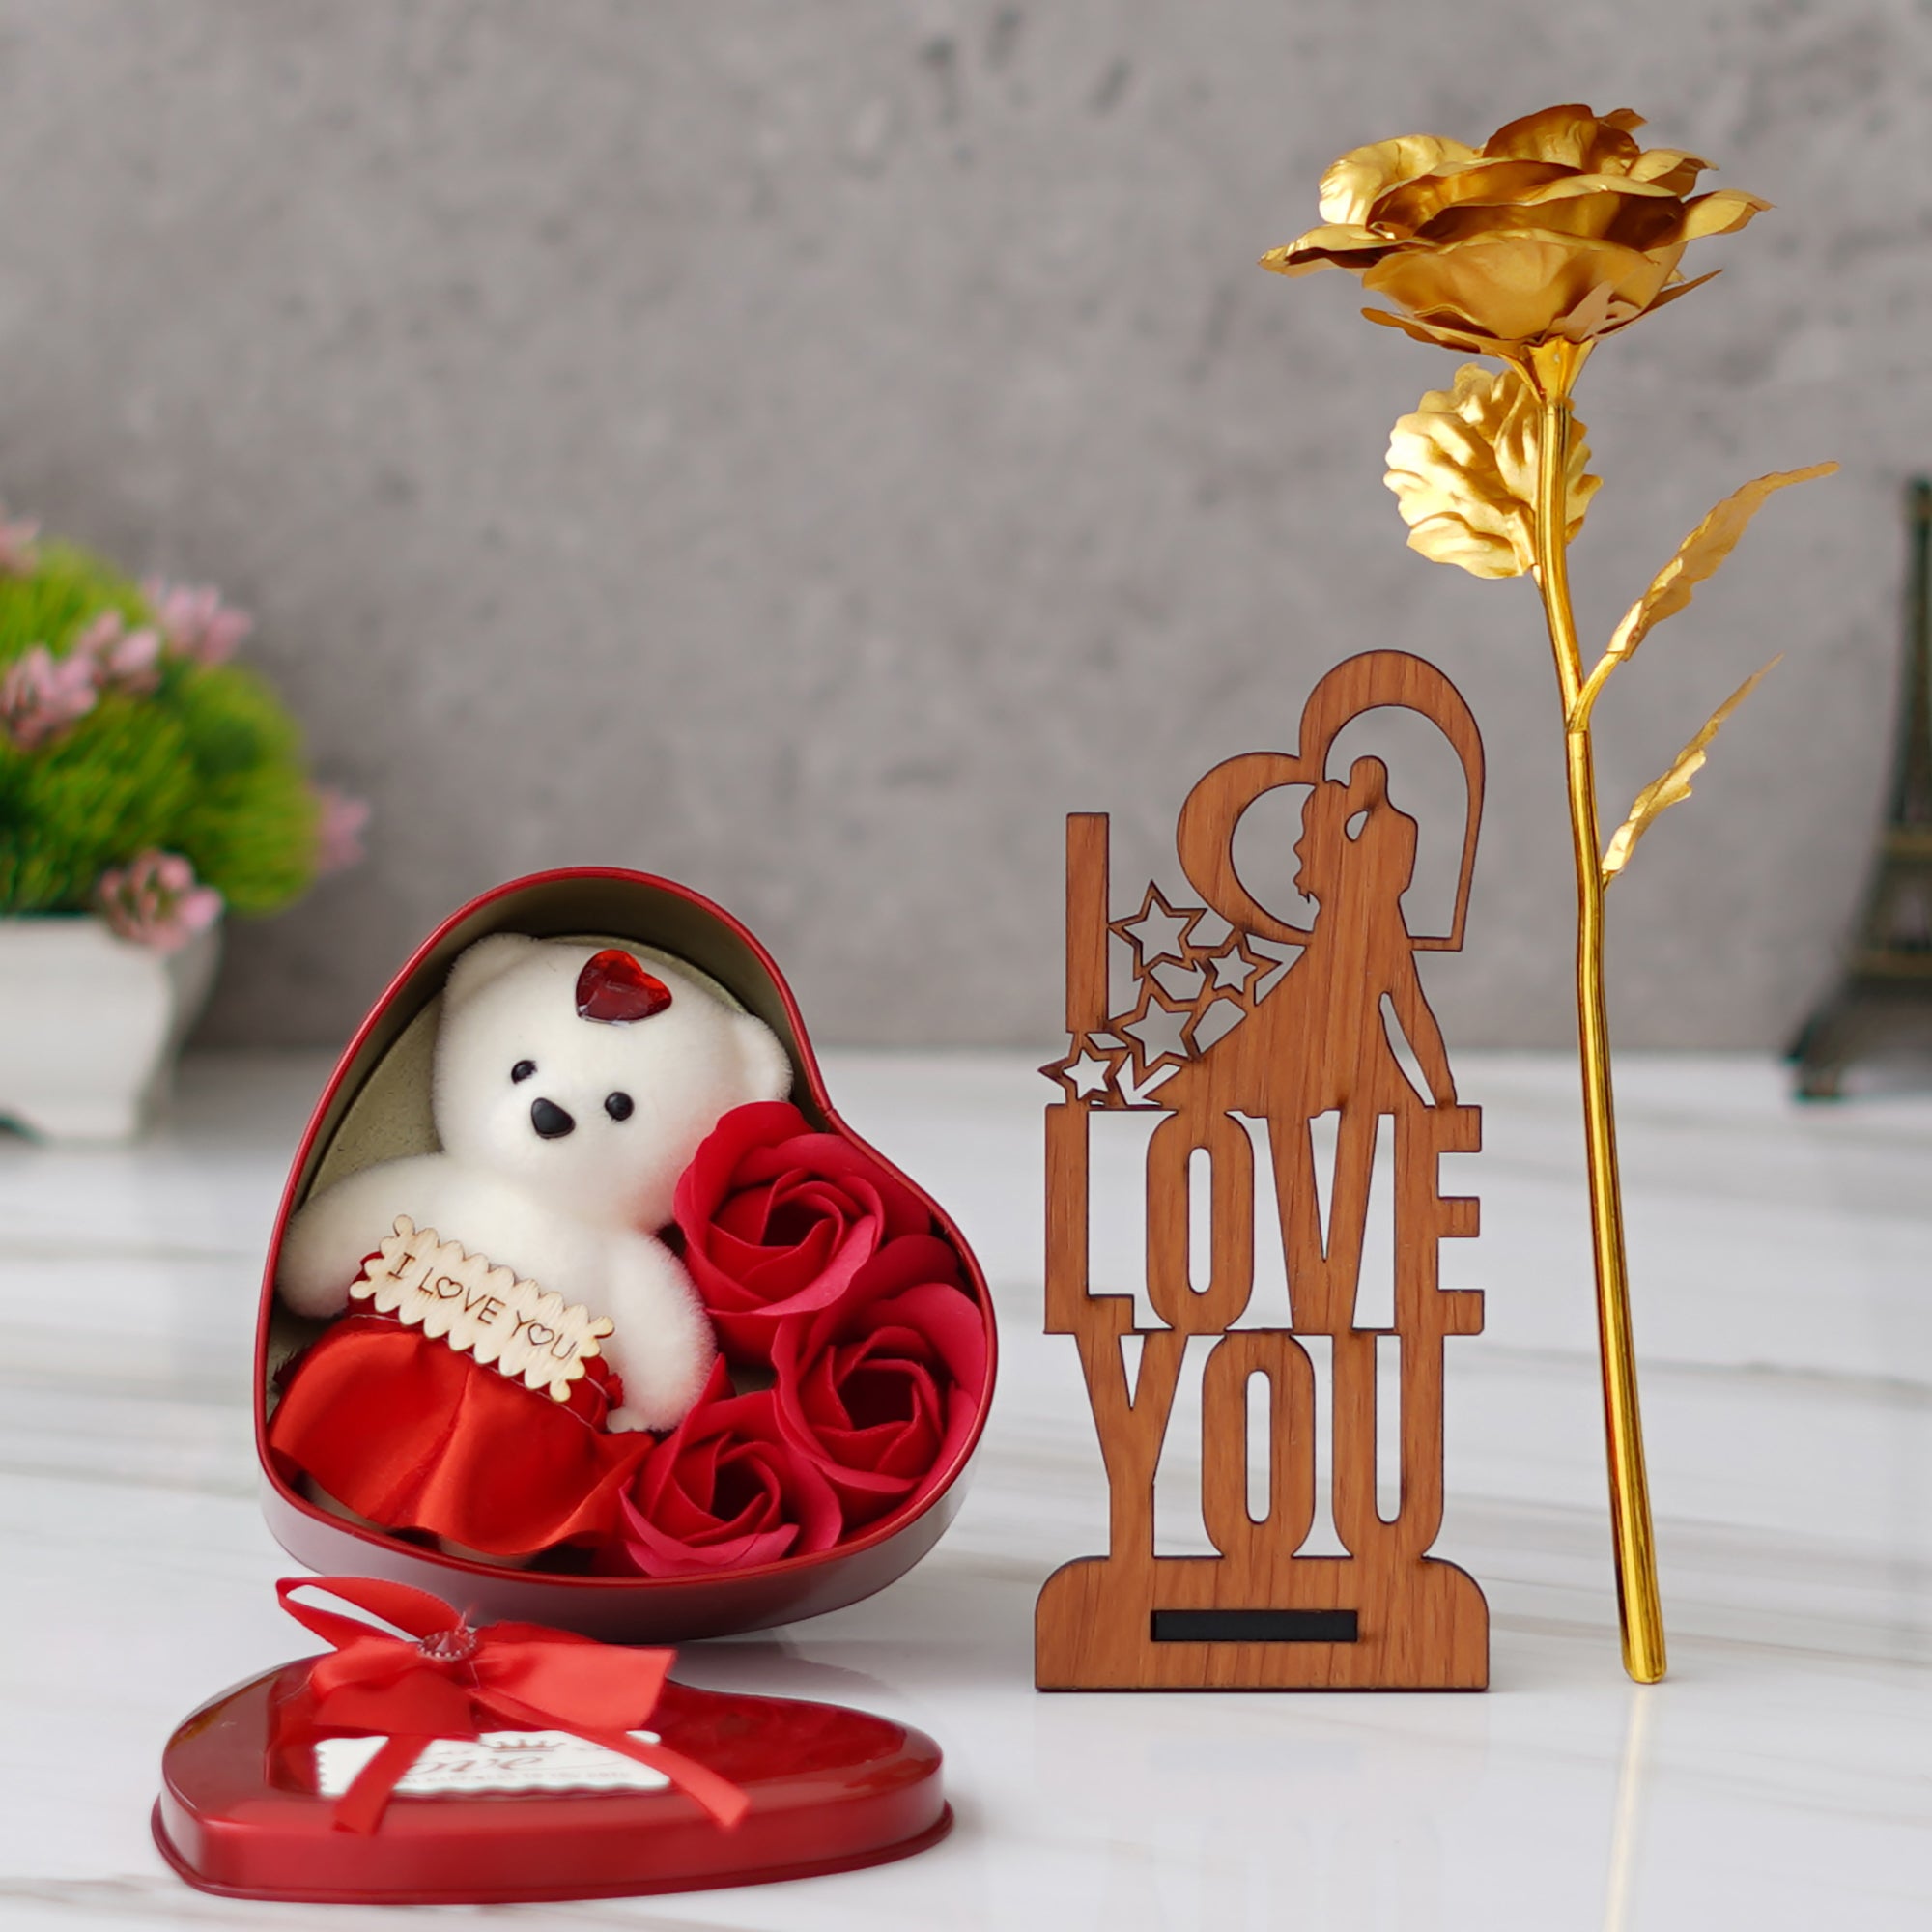 Valentine Combo of Golden Rose Gift Set, "Love You" Wooden Showpiece With Stand, Heart Shaped Gift Box Set with White Teddy and Red Roses